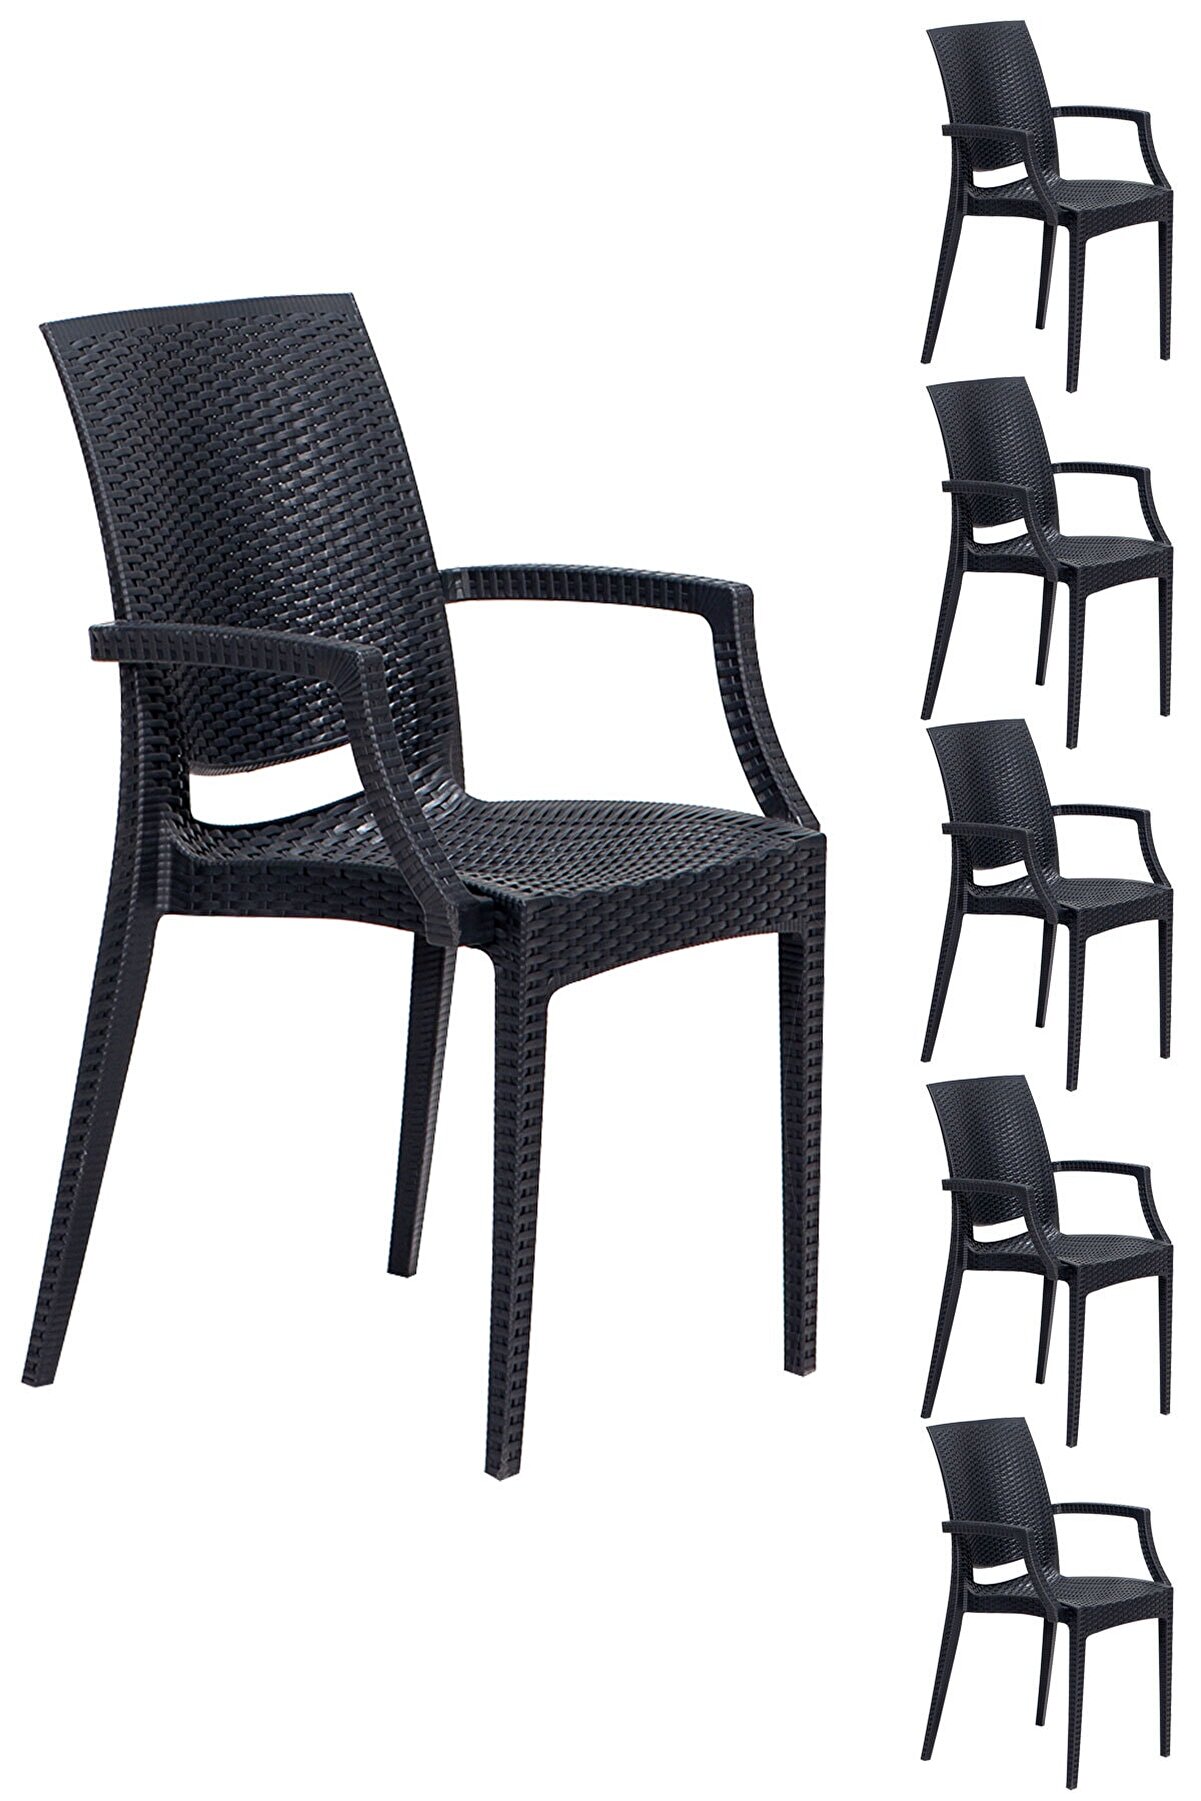 6 Pcs. Rattan Lux Anthracite Chairs / Balcony-Garden-Terrace